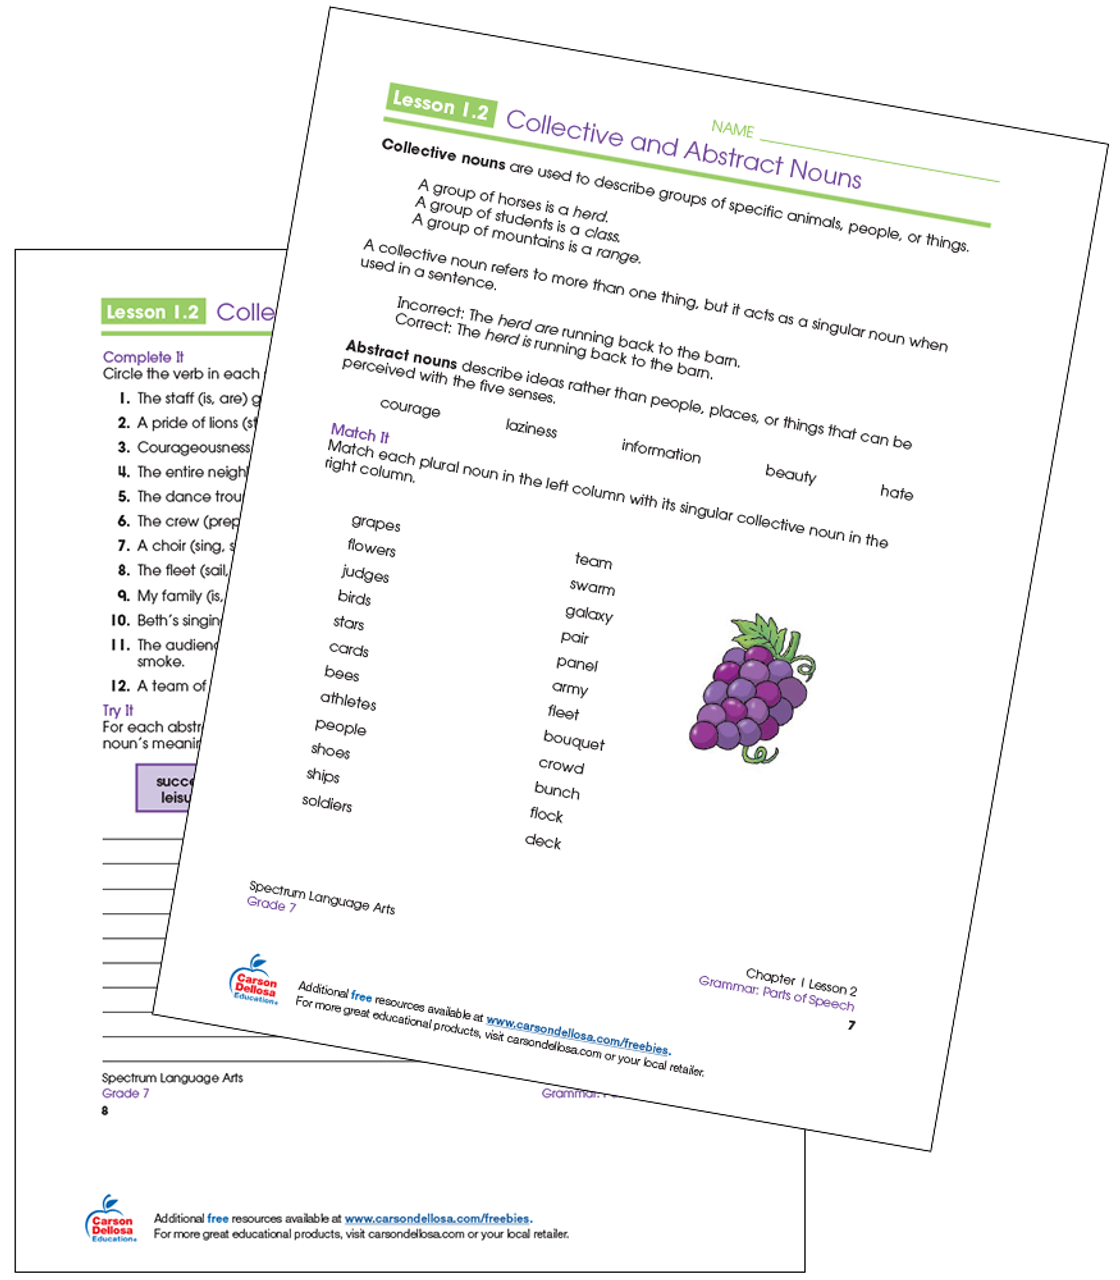 common-or-abstract-nouns-worksheet-have-fun-teaching-nouns